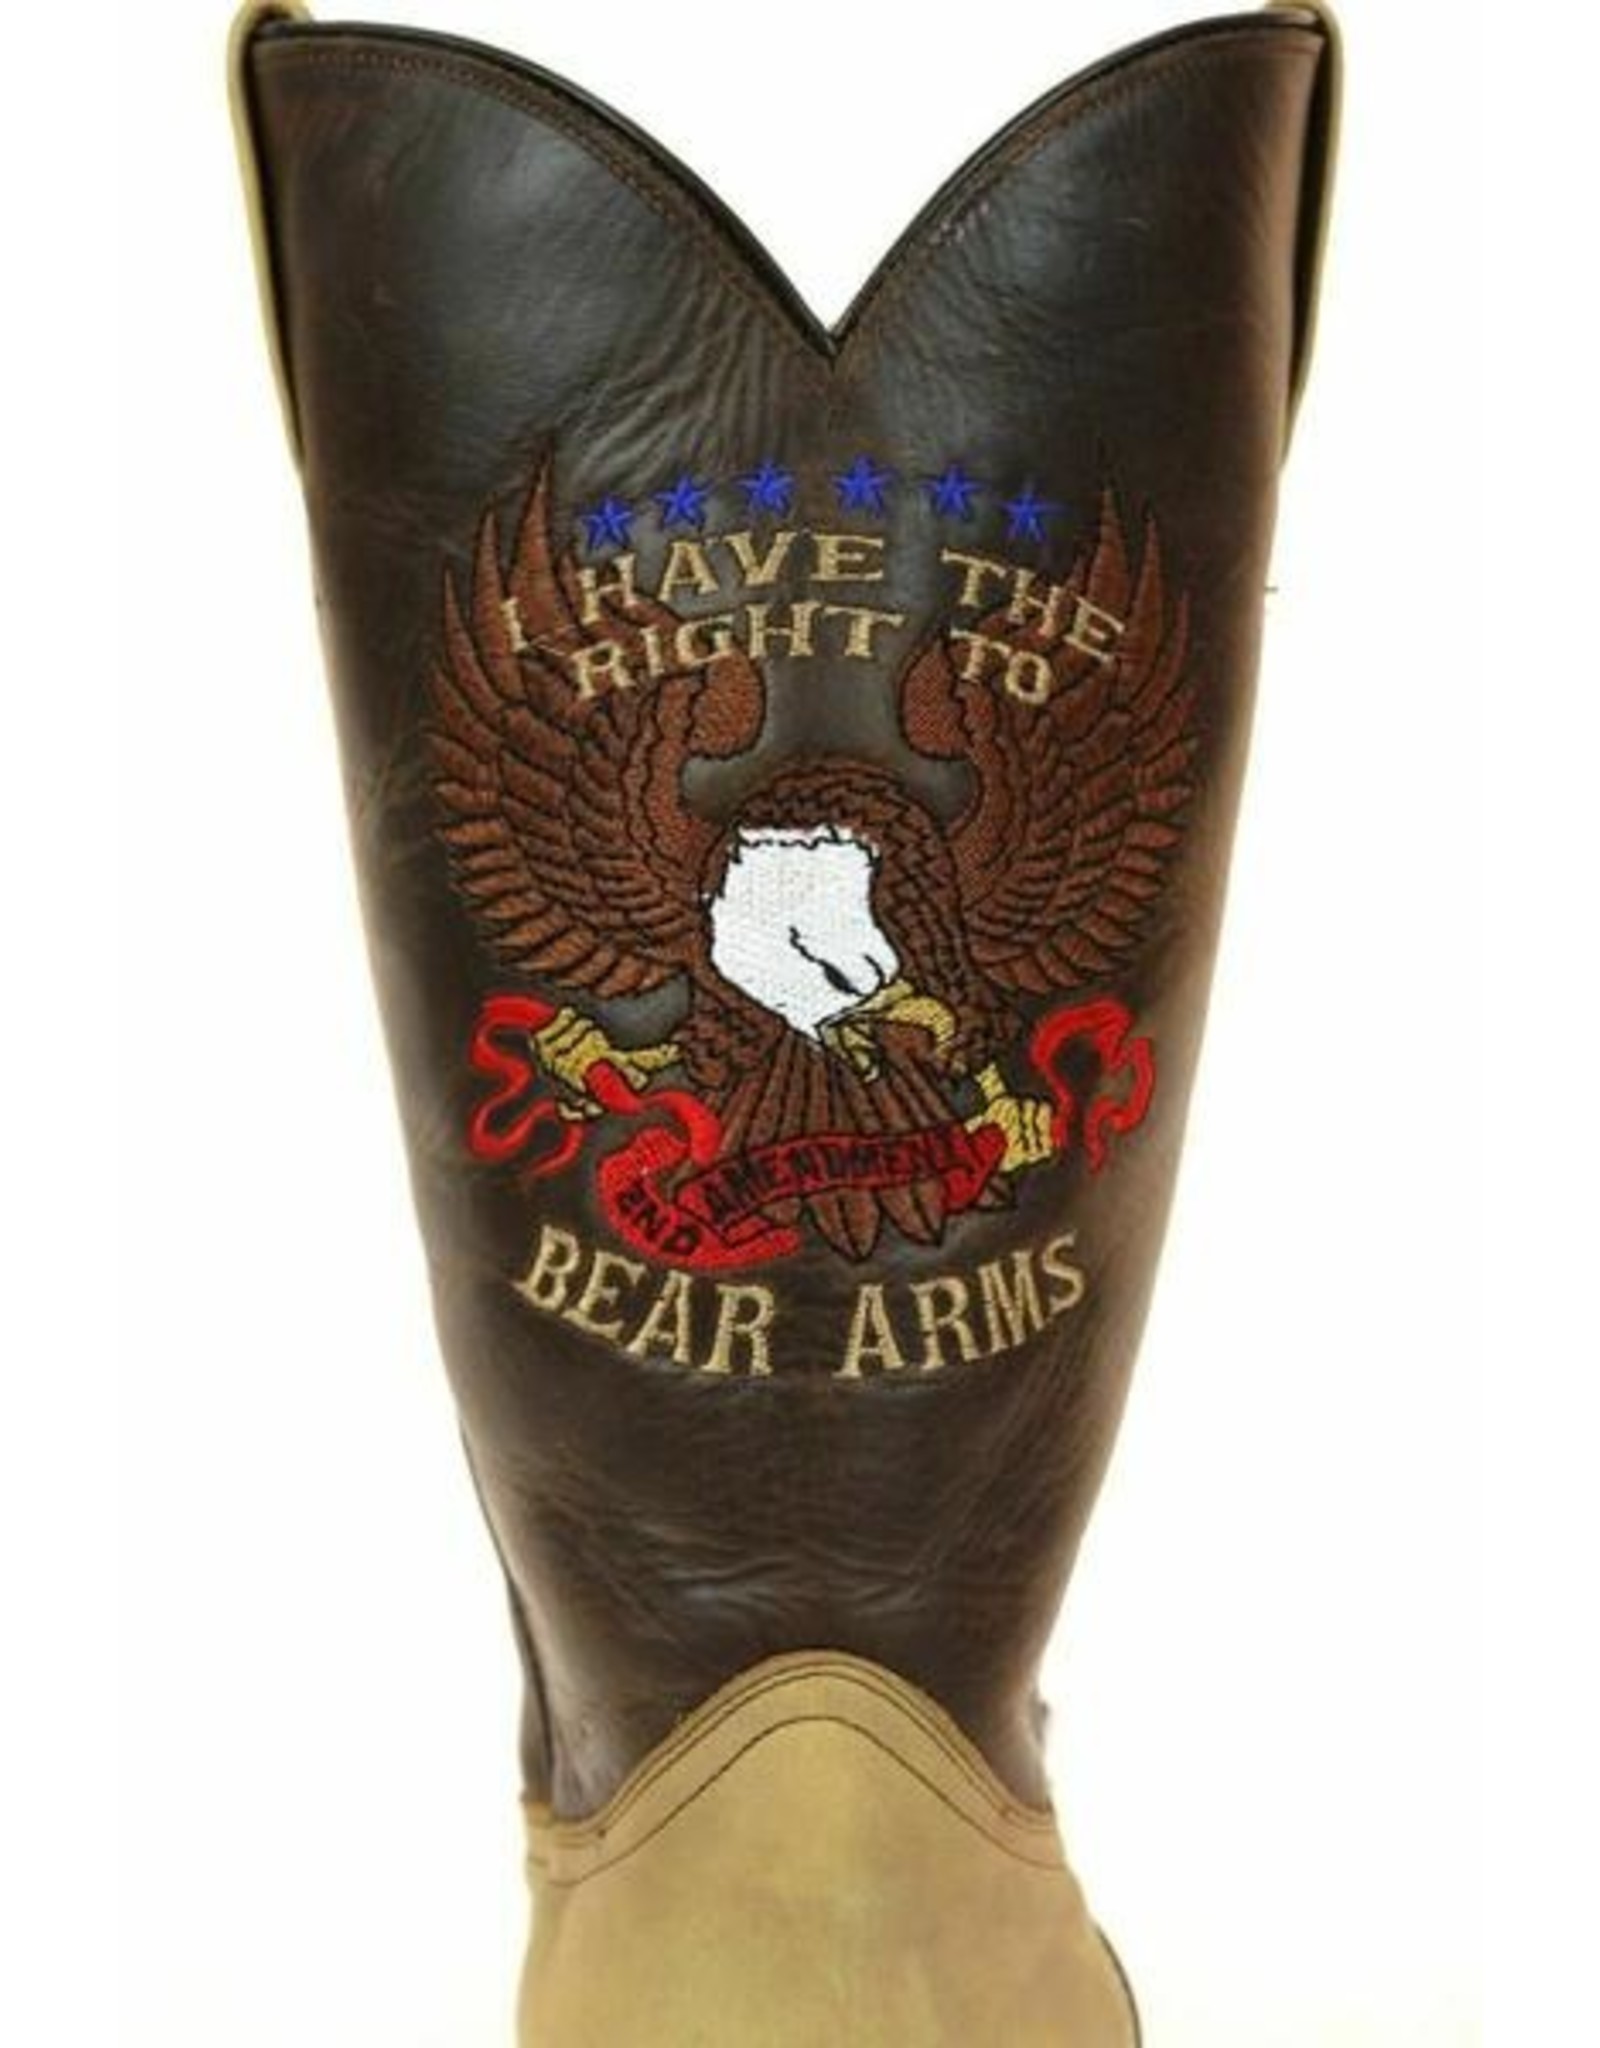 Boots-Men Rockin Leather 1199 Right to Bear Arms